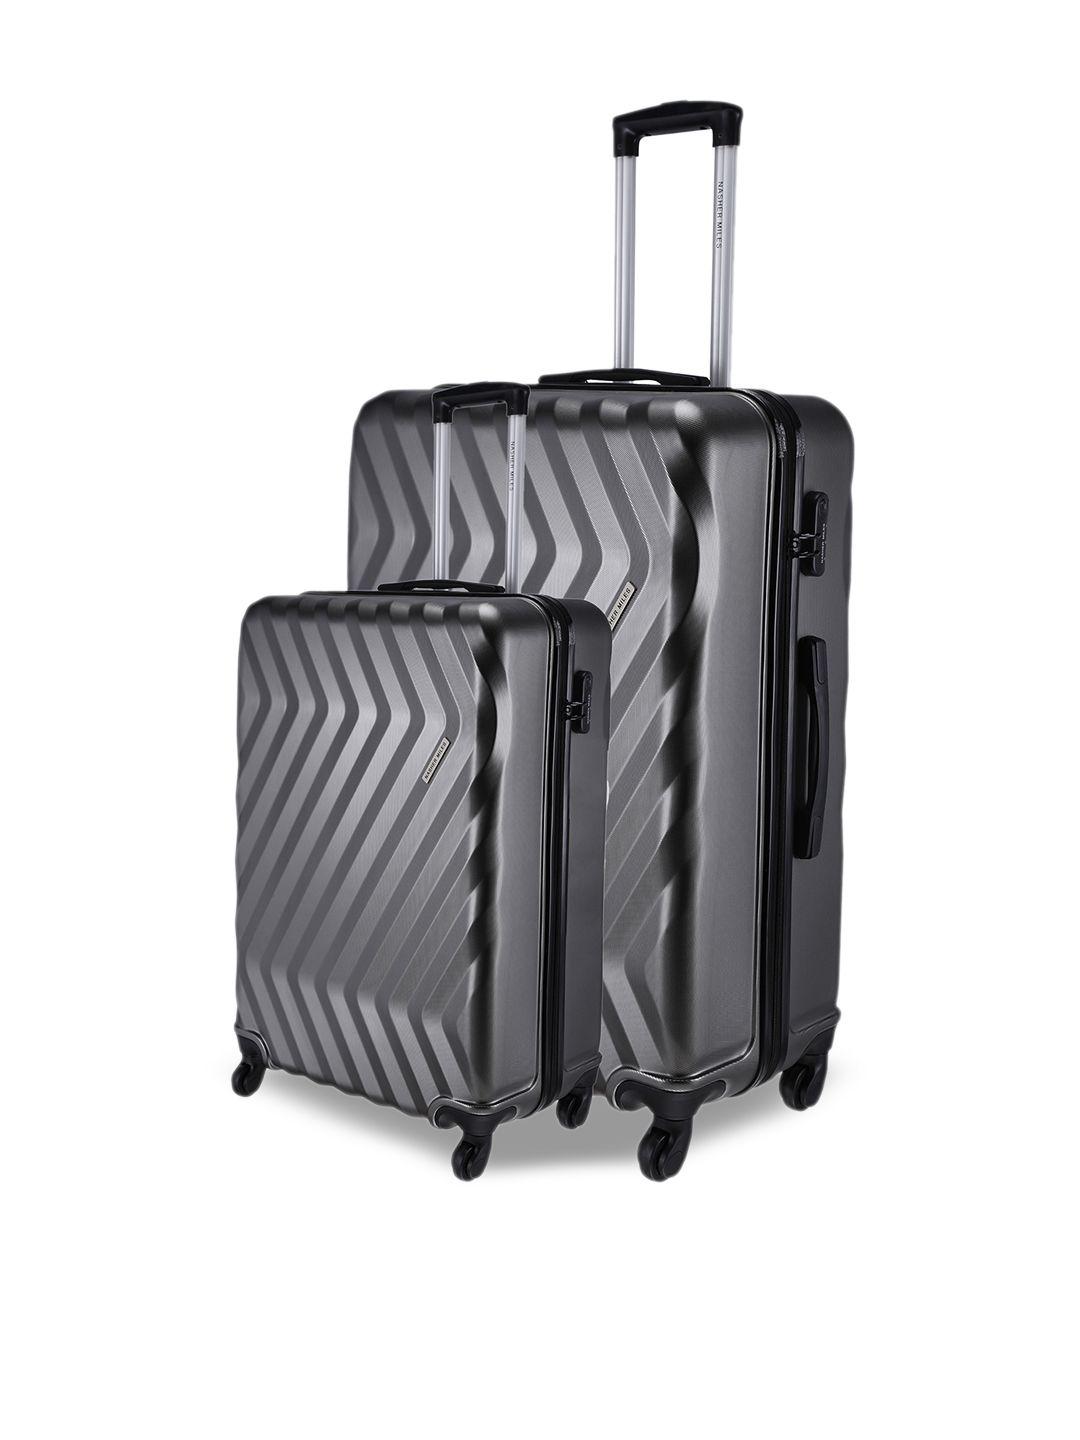 nasher miles unisex set of 2 grey trolley suitcases nasher miles lombard